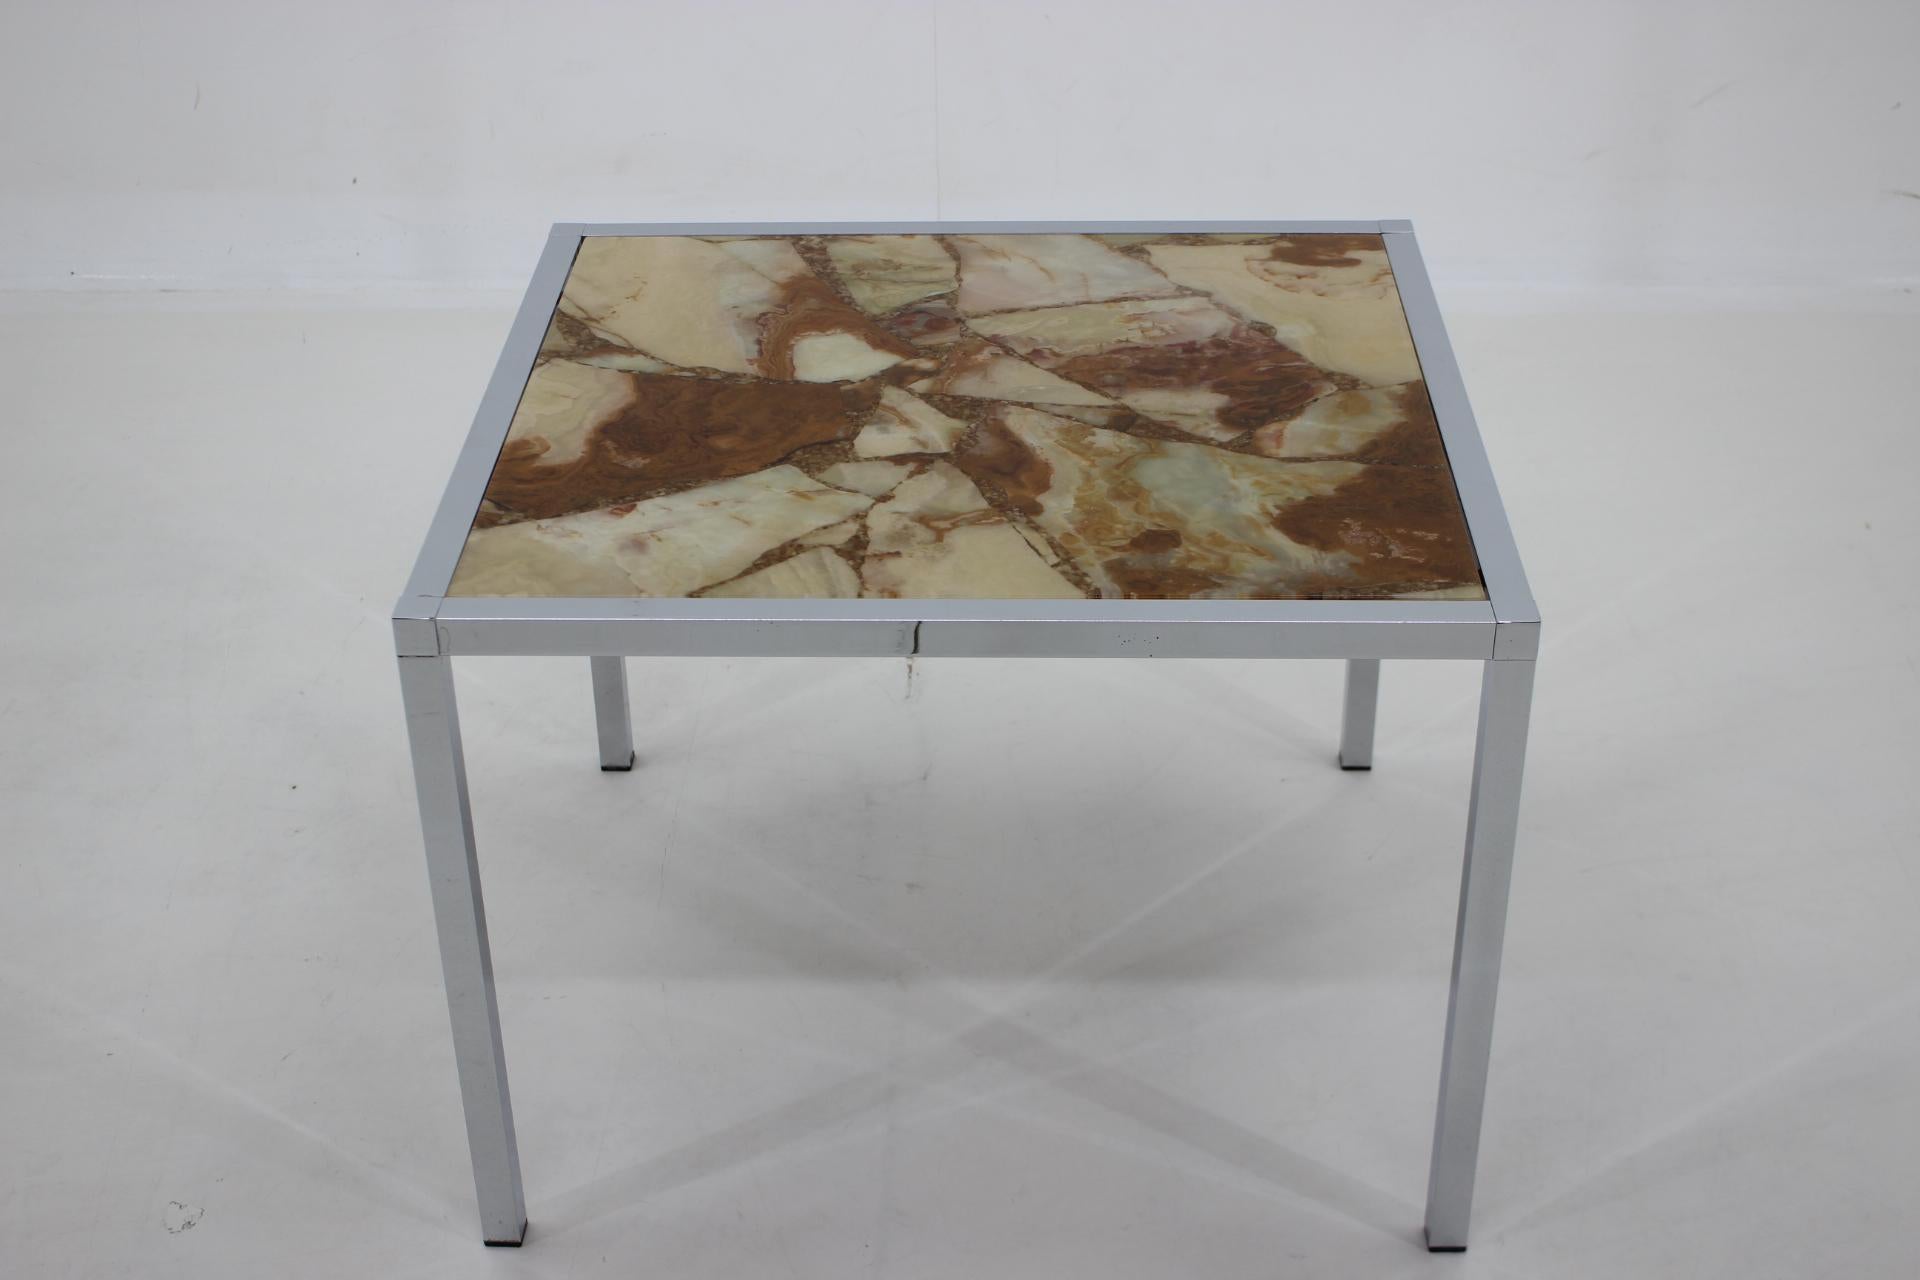 - Repolished resin top desk 
- Chrome plated parts with minor signs of use 